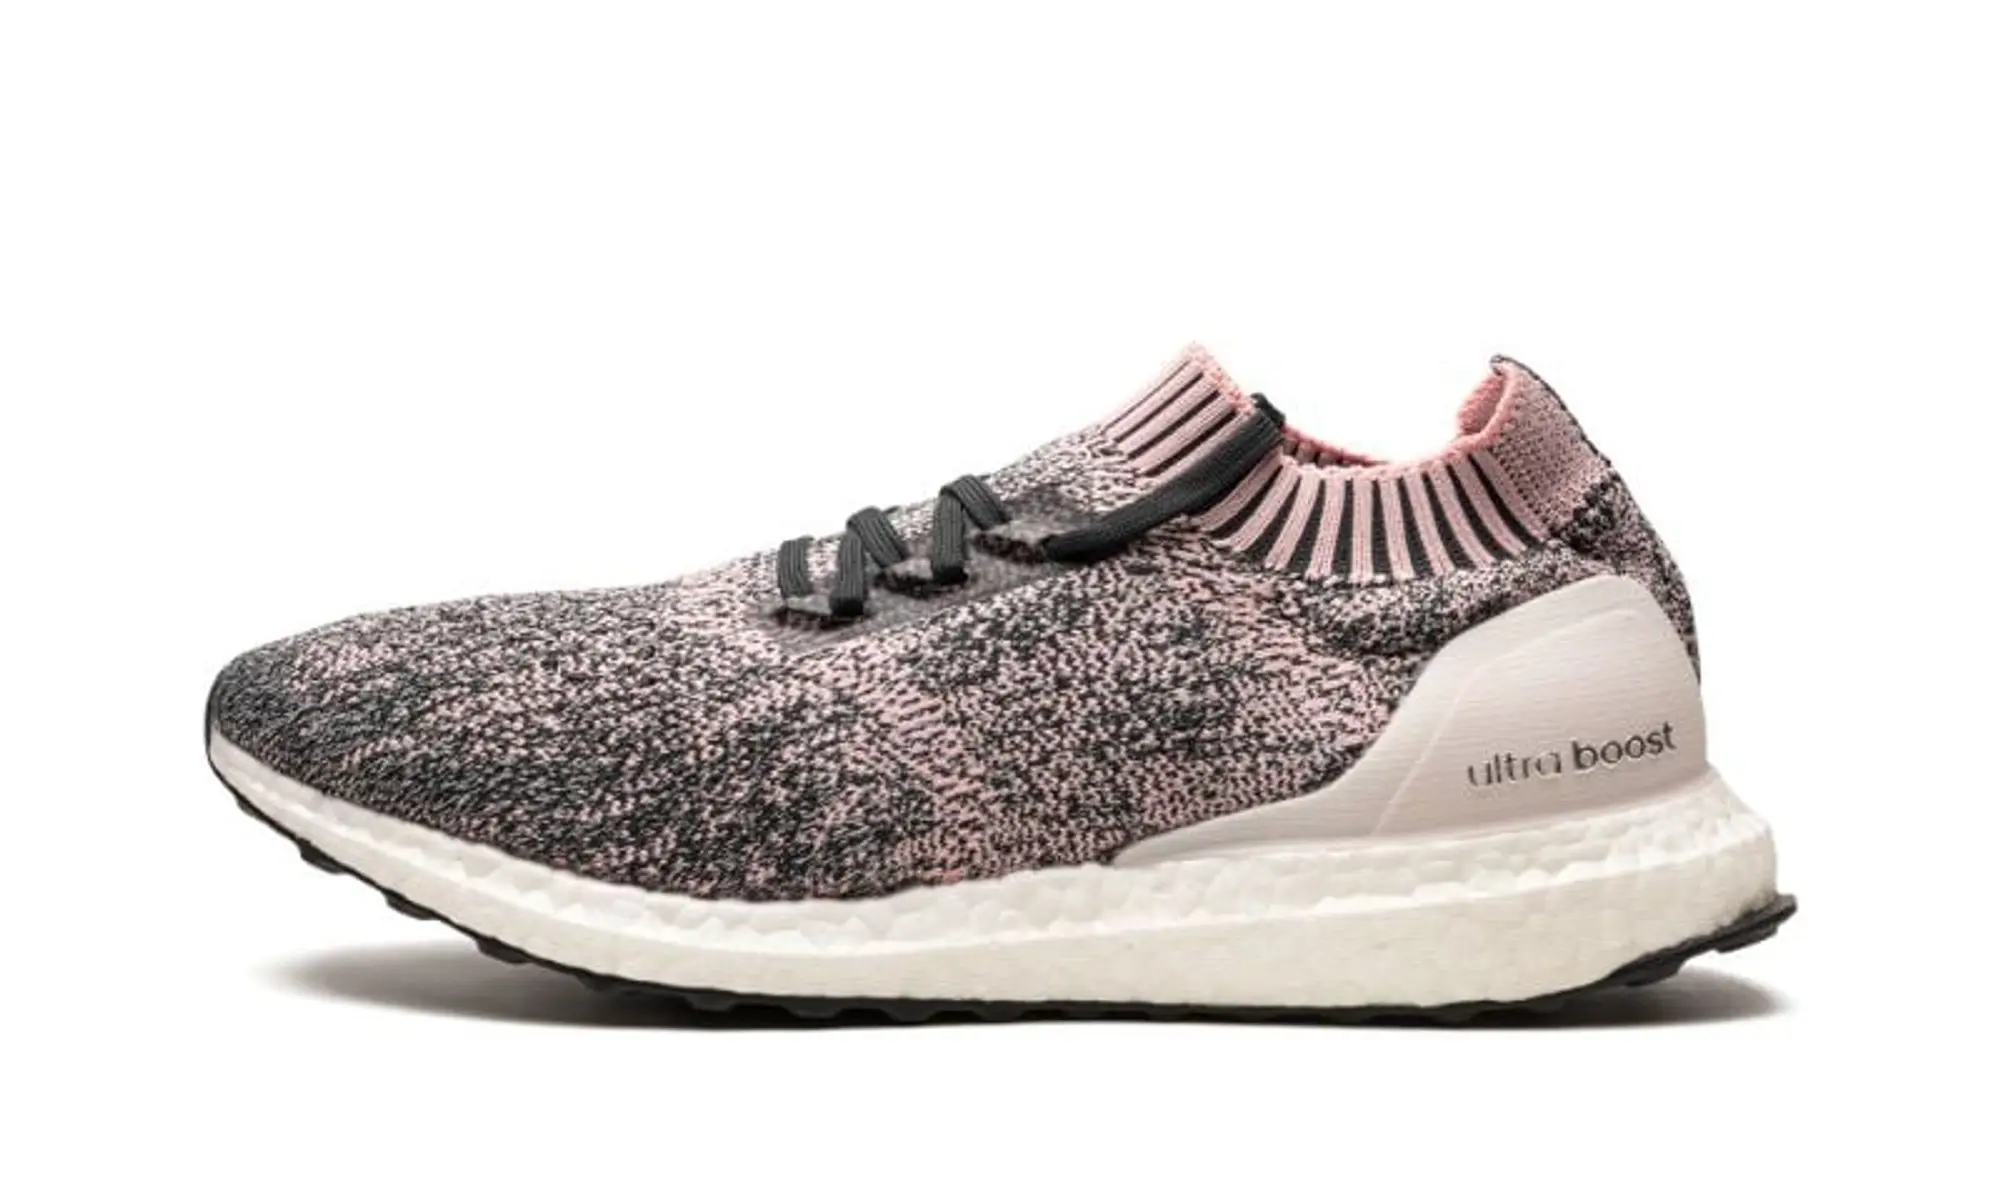 adidas UltraBoost Uncaged Pink Carbon Shoes